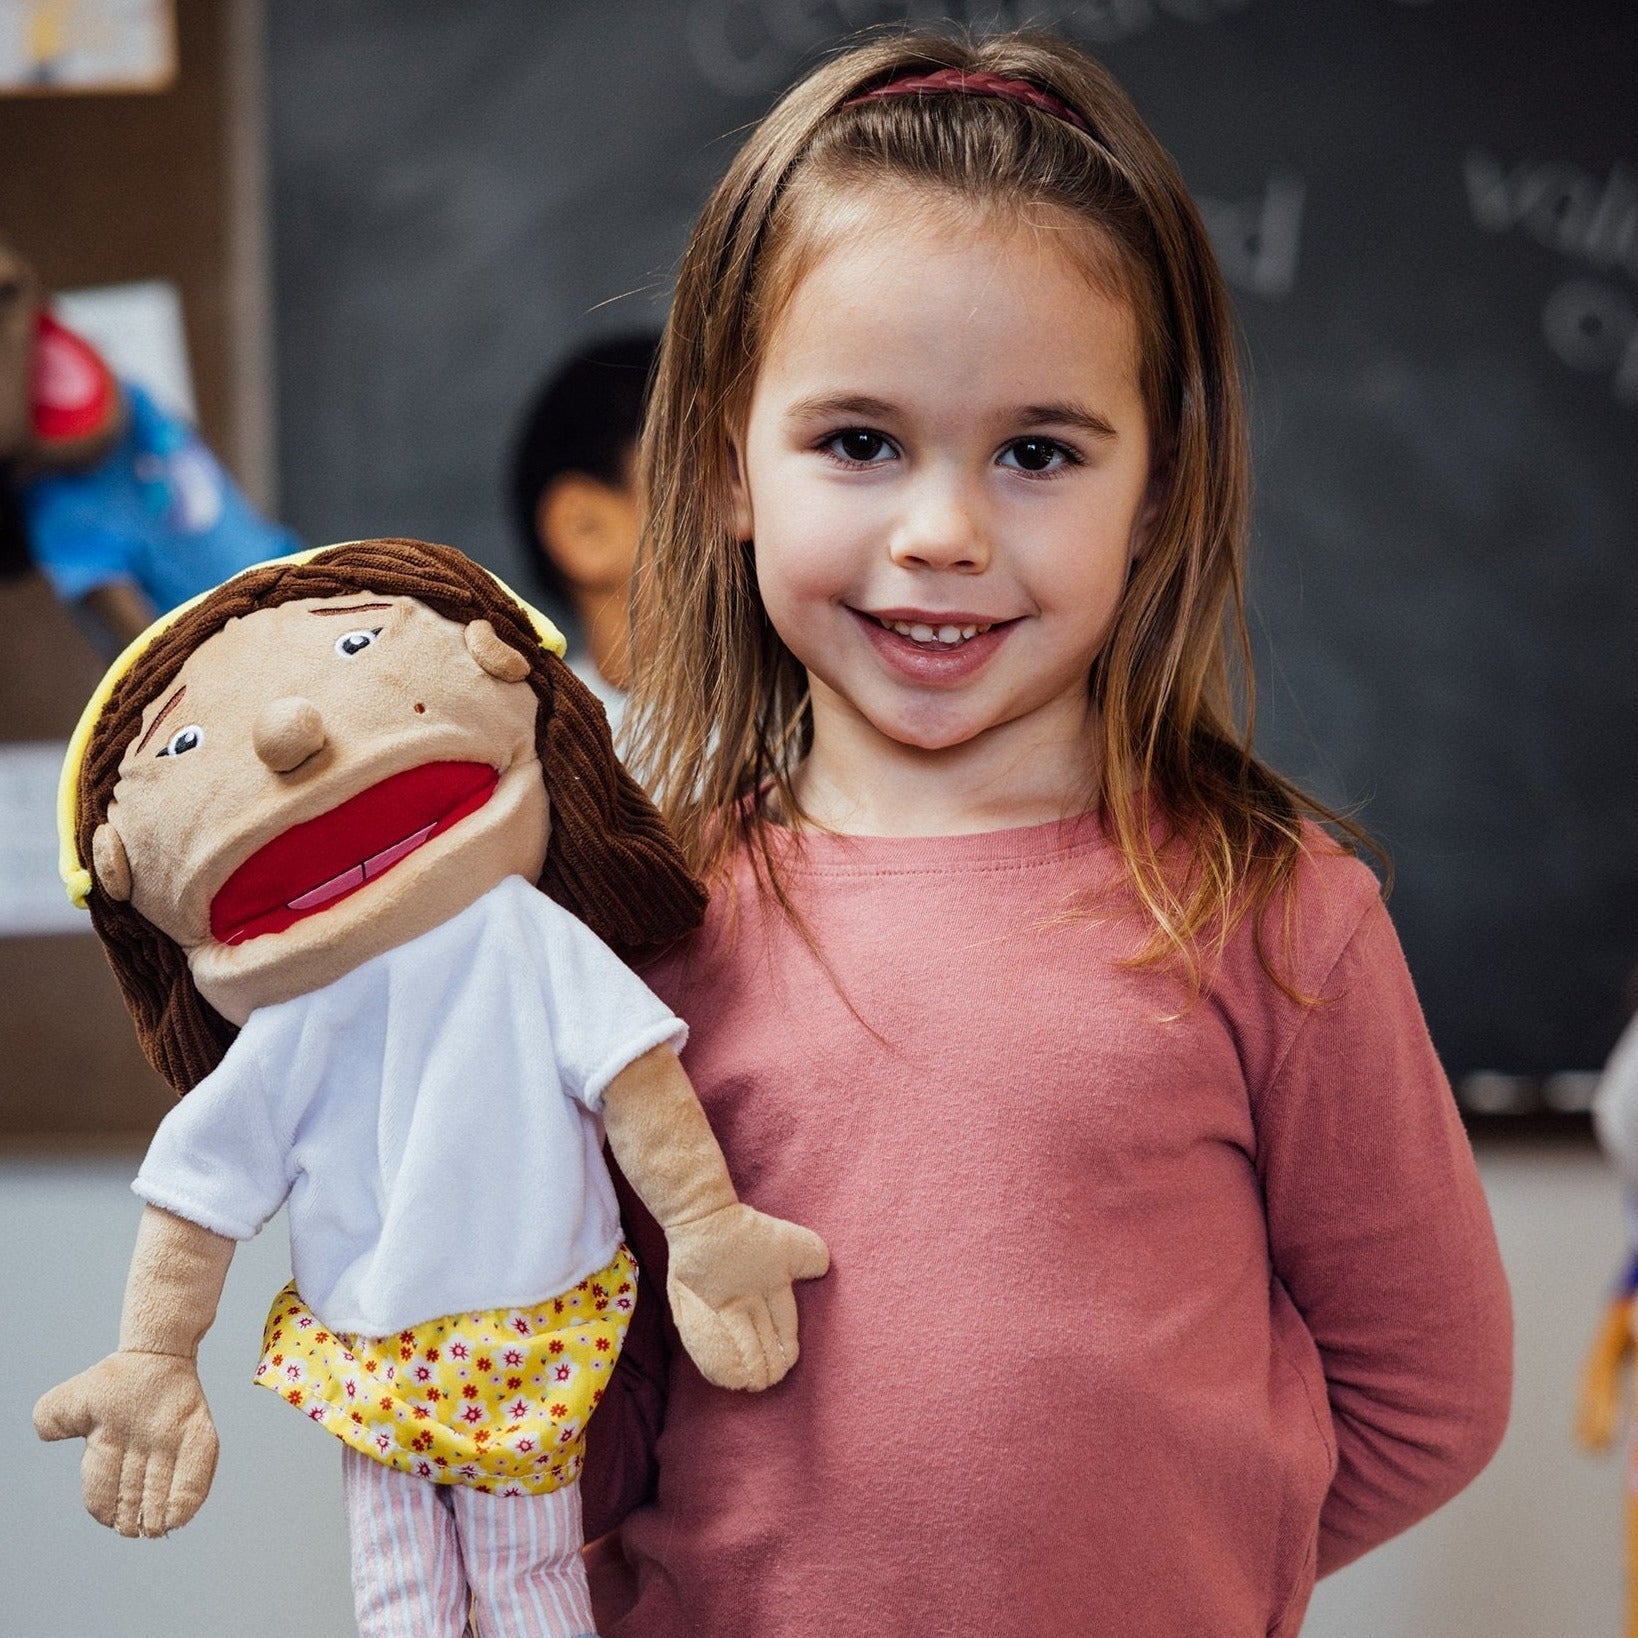 Julia's Puppet, Introducing Julia Rojas, the embodiment of spirit, friendship, and good sportsmanship, brought to life through the vibrant and engaging design of our newest kid puppet. Designed to foster emotional expression and spur the wildest bounds of imaginative play, Julia Rojas is ready to become your child's new favorite playmate, aiding in their personal and emotional development one playful adventure at a time. Product Features Superior Craftsmanship for Safe Play Adhering strictly to child safety